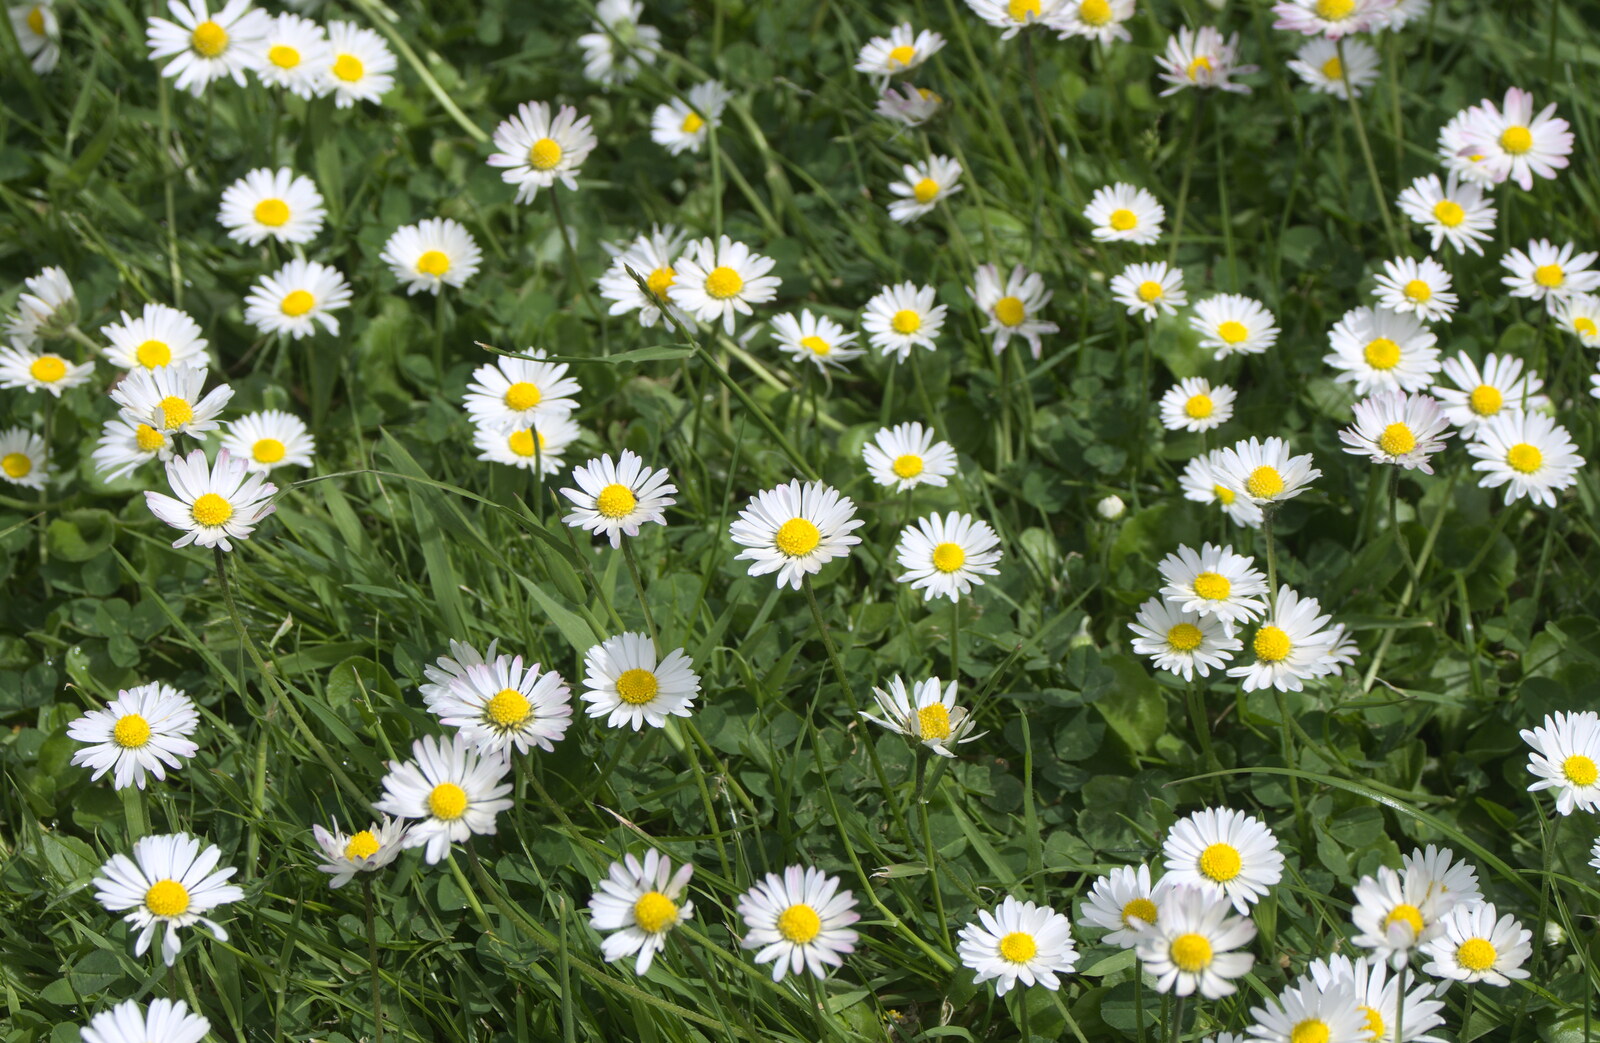 Daisies in the lawn from La Verna Monastery and the Fireflies of Tuscany, Italy - 14th June 2013